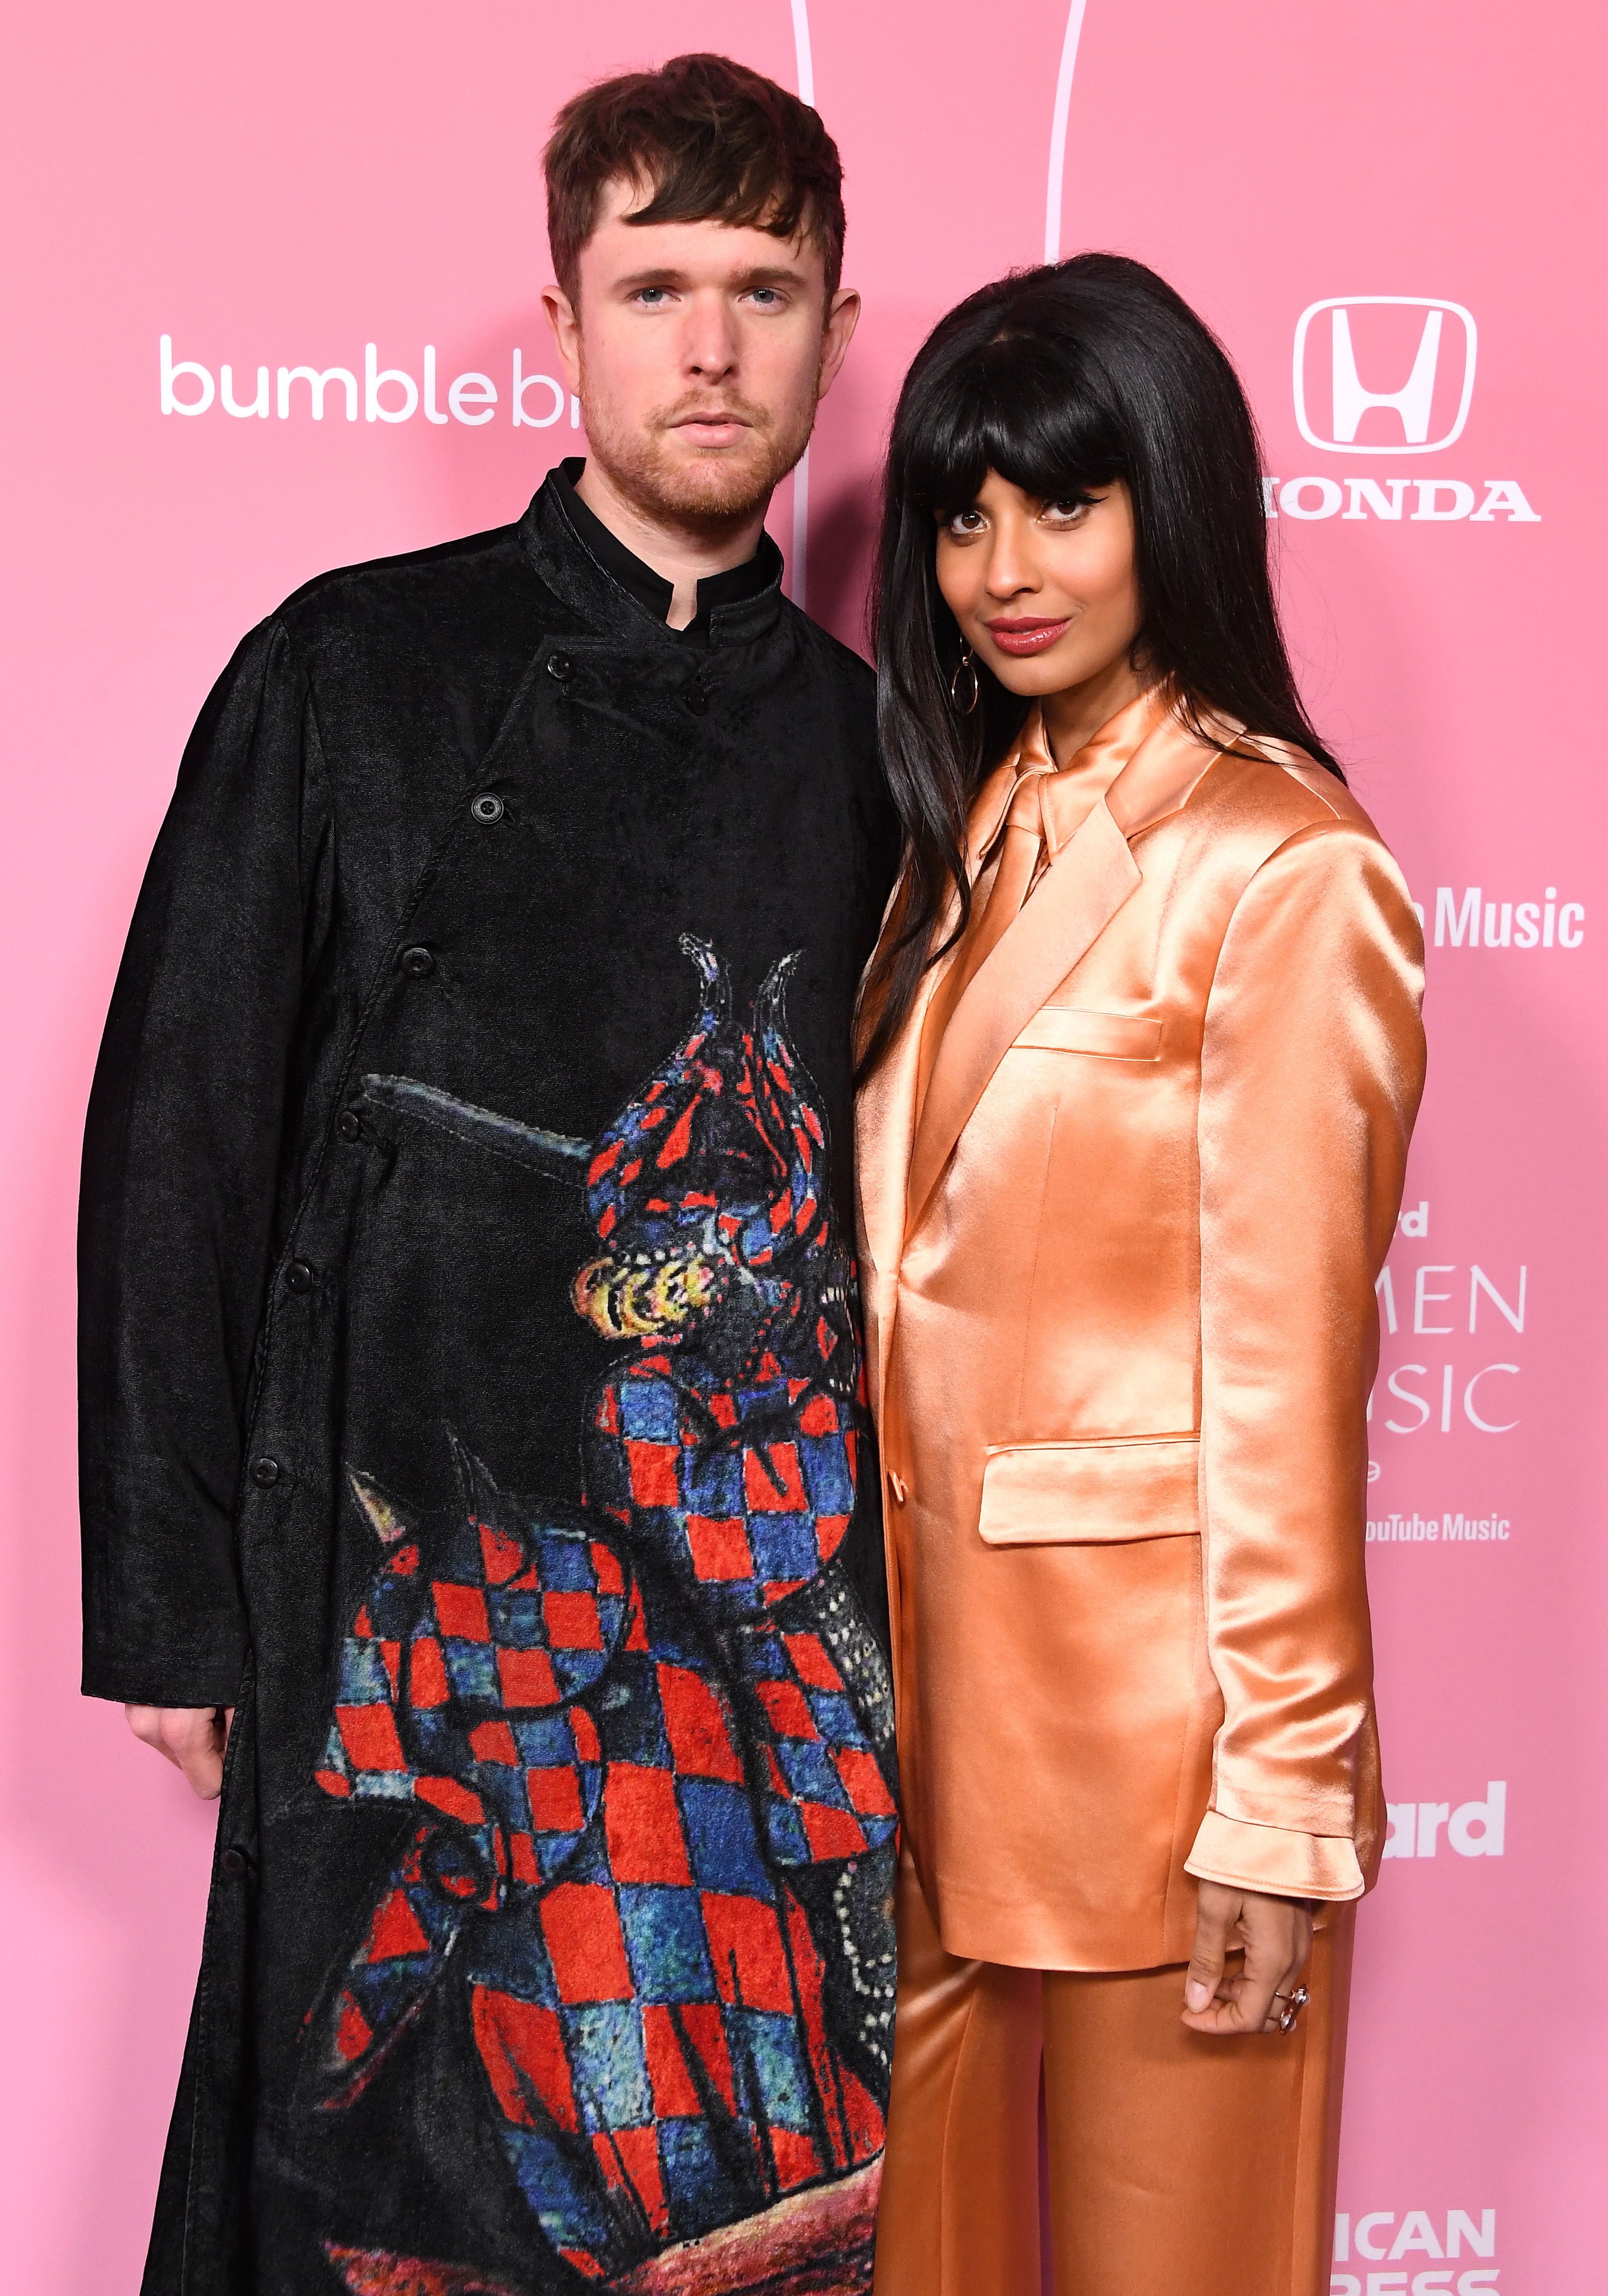 James Blake and Jameela Jamil at the 2019 Billboard Women In Music in Los Angeles | Source: Getty Images